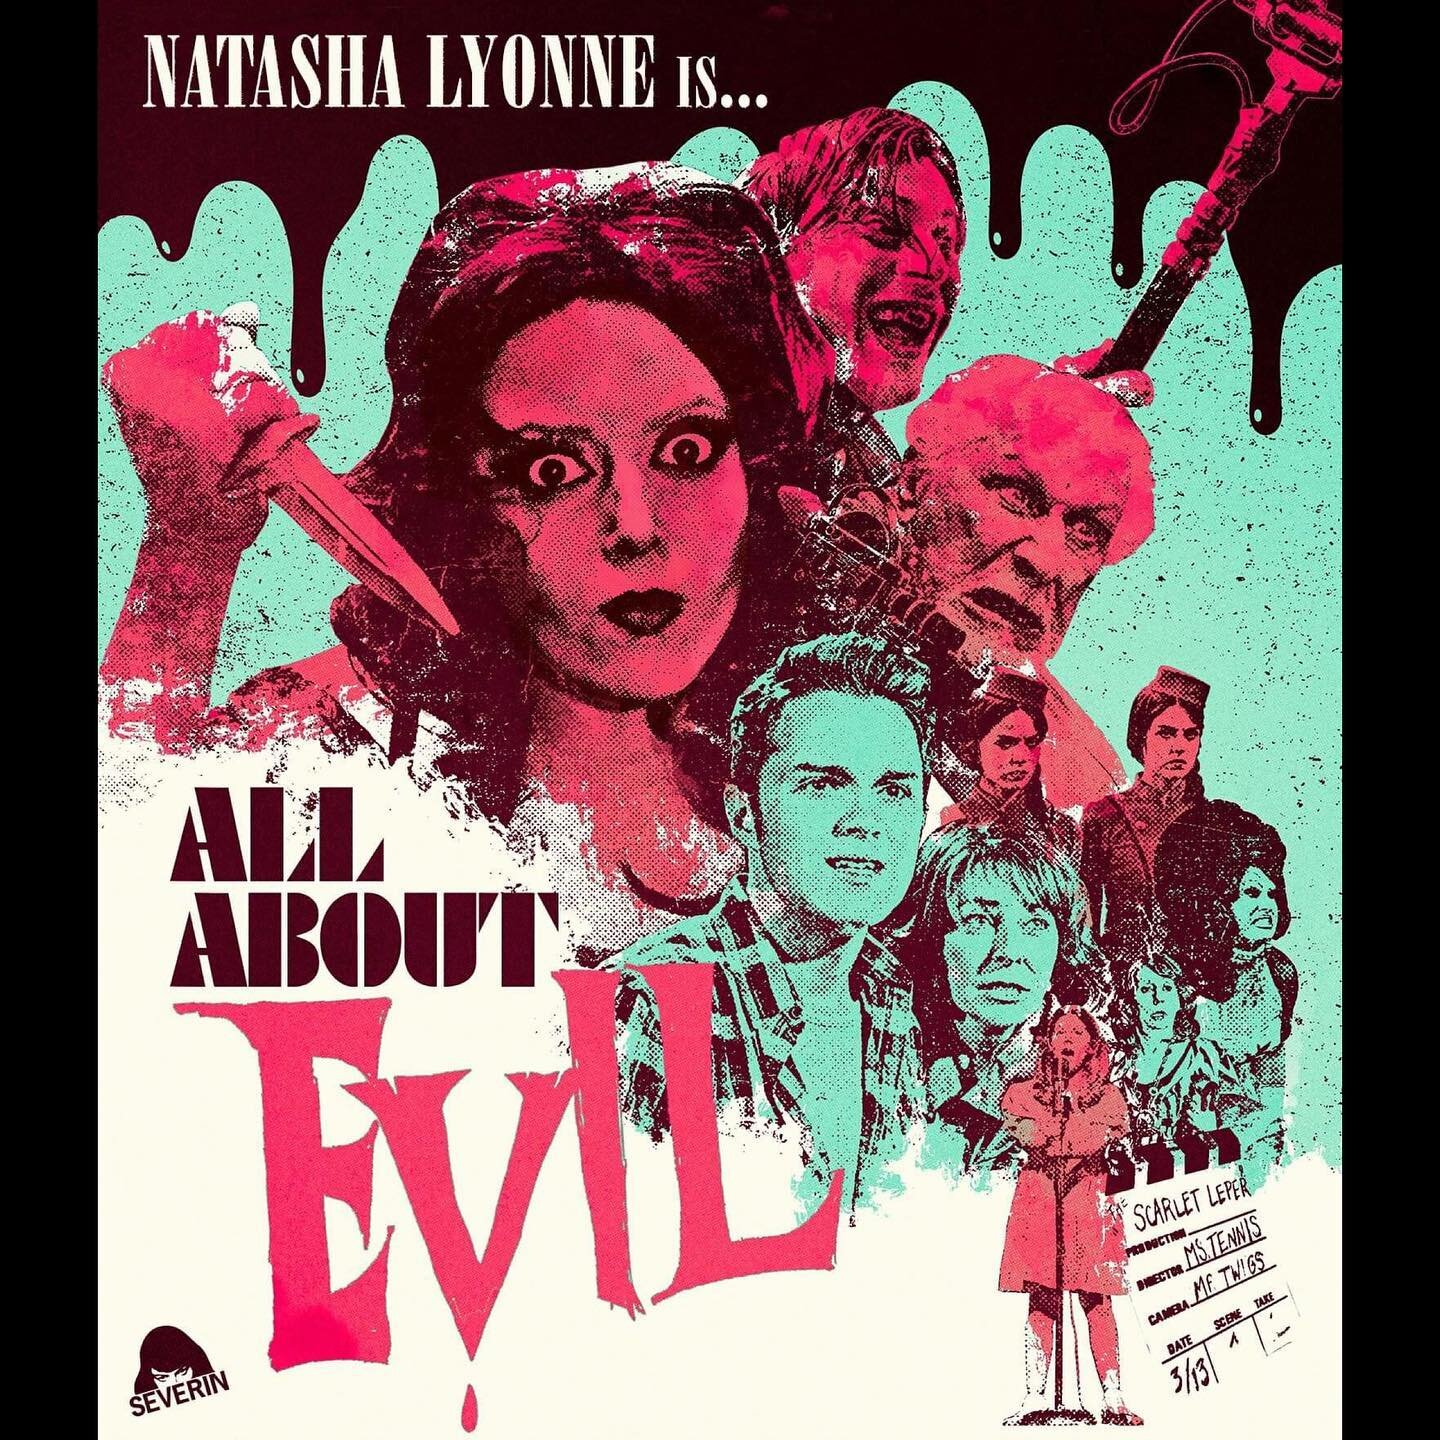 It&rsquo;s BACK!! 🎞🎬 I&rsquo;m so friggin&rsquo; excited that my first feature - All About Evil - is heading back to theaters for a tour of special event screenings this June! Huge thanks to @thepeacheschrist @nlyonne and MANY MANY others for makin